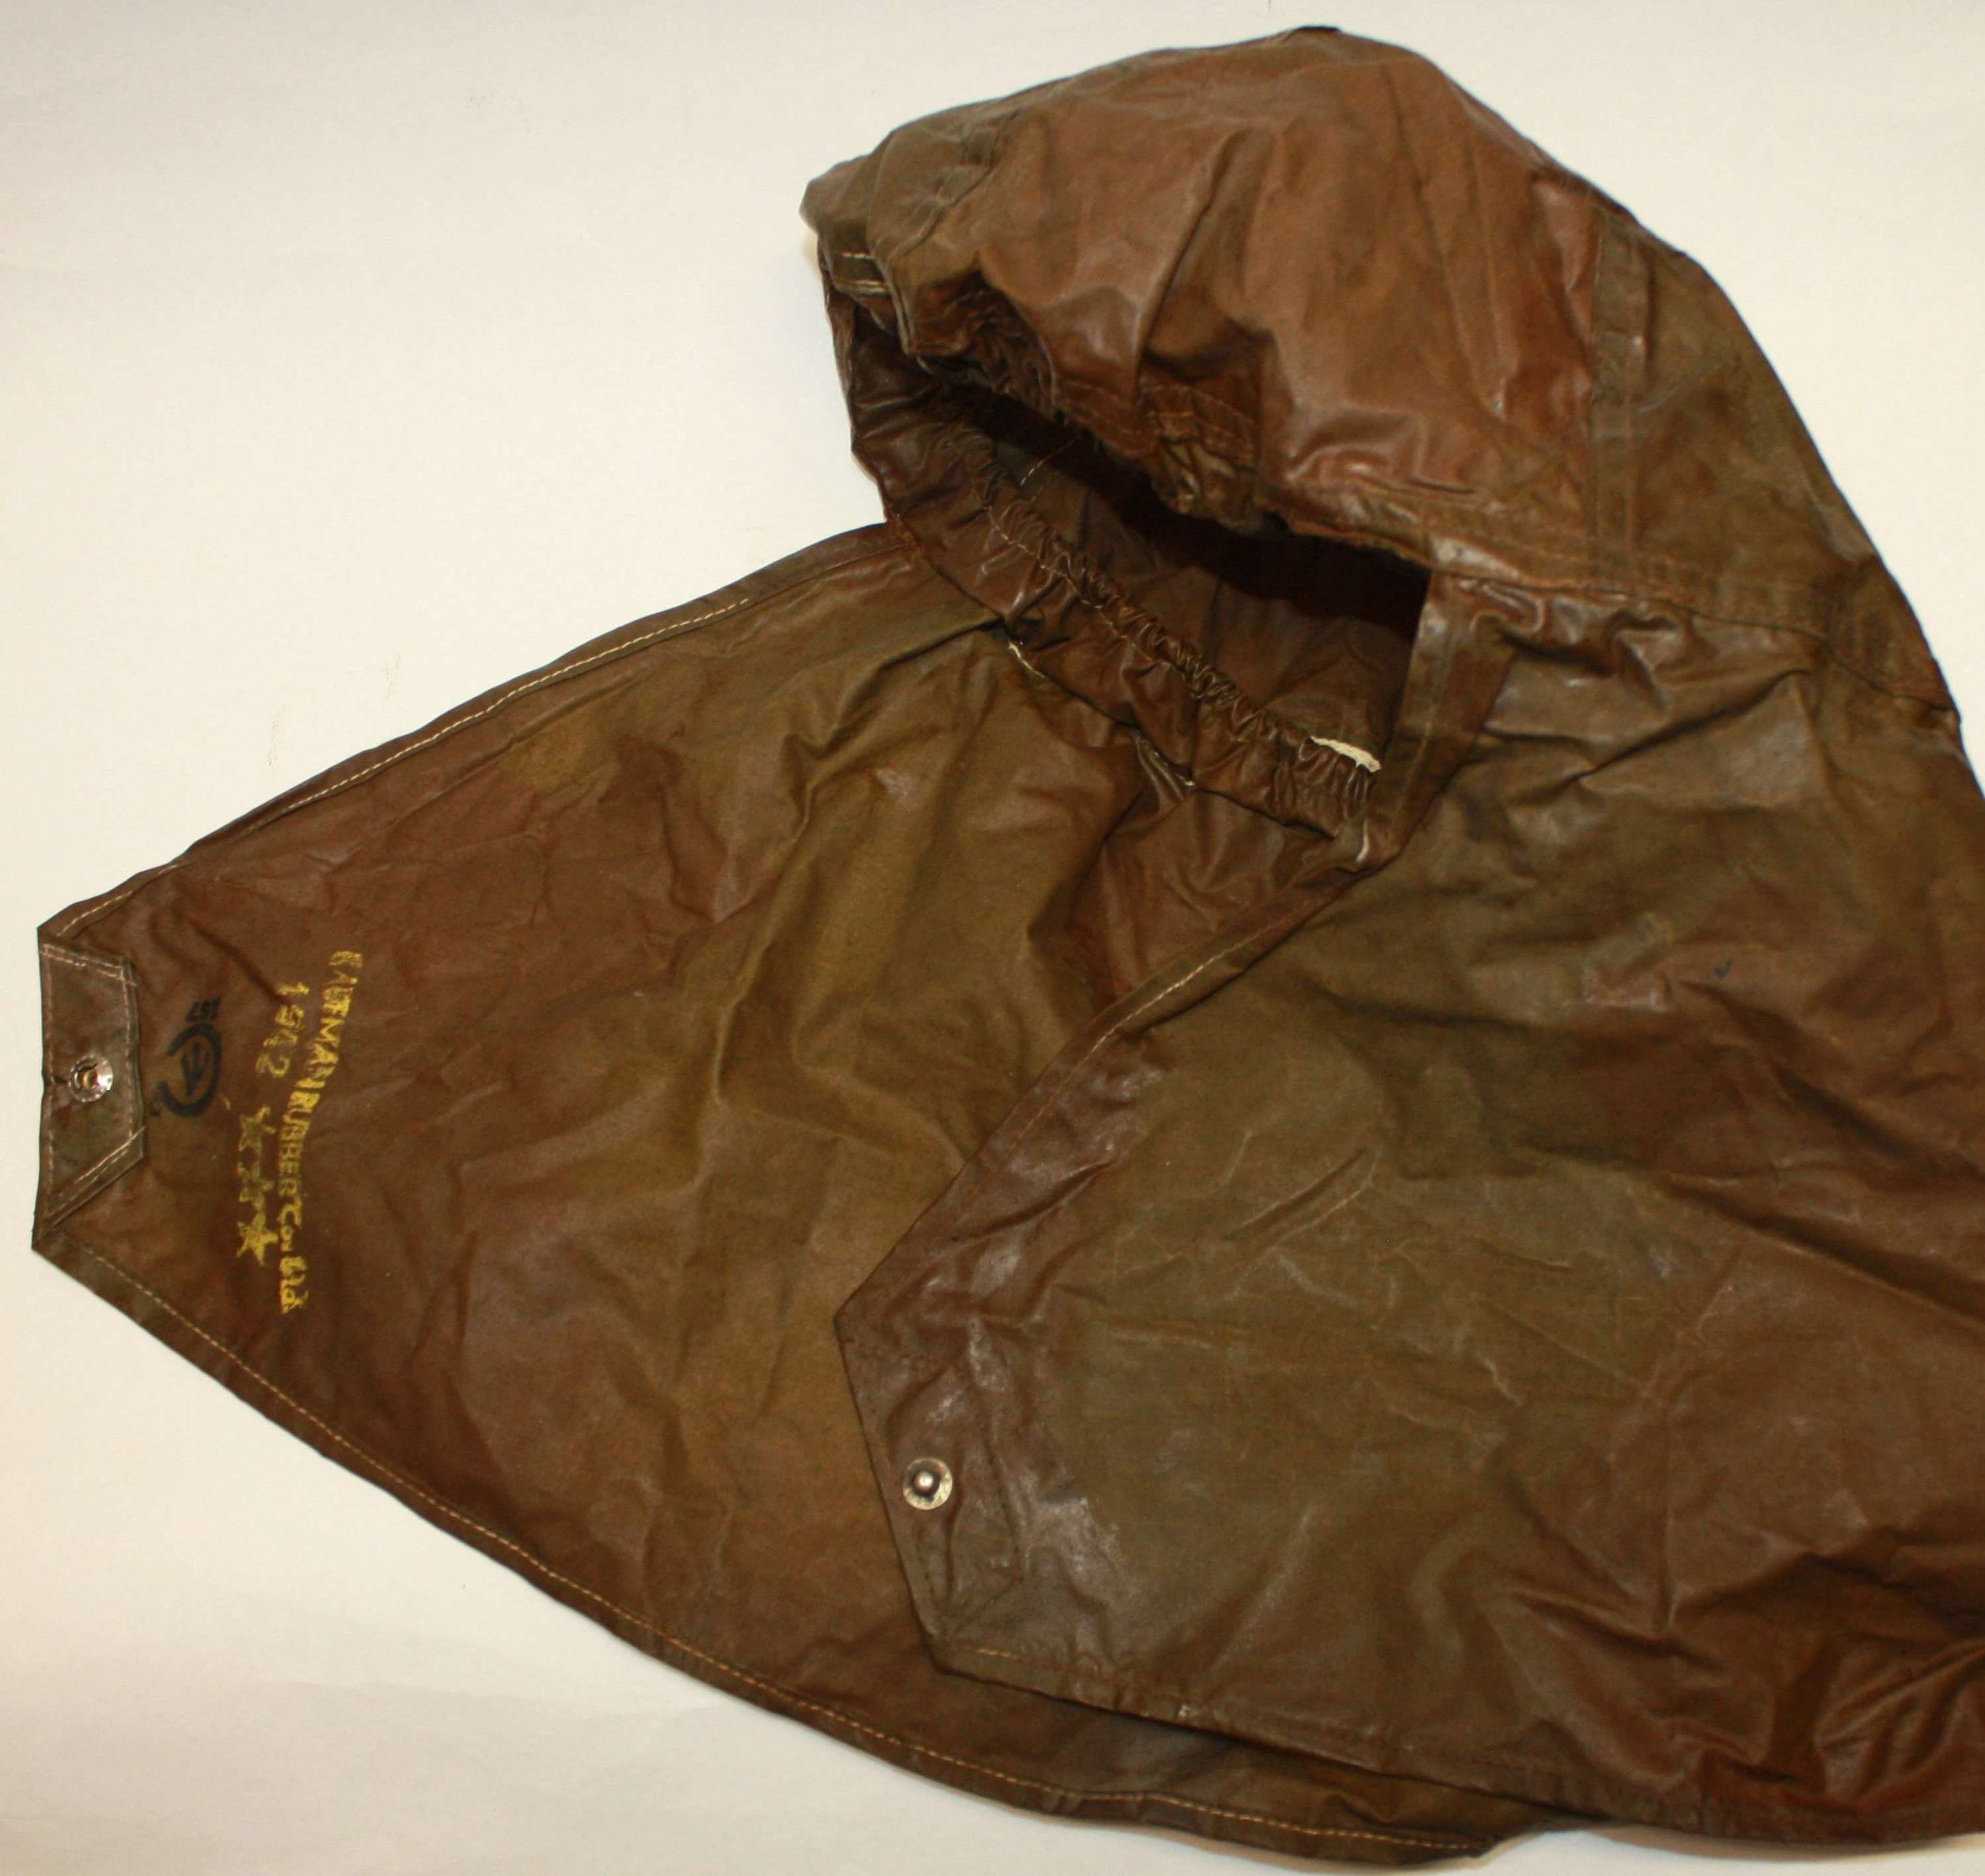 A 1942 DATED CANADIAN GAS HOOD / HELMET COVER